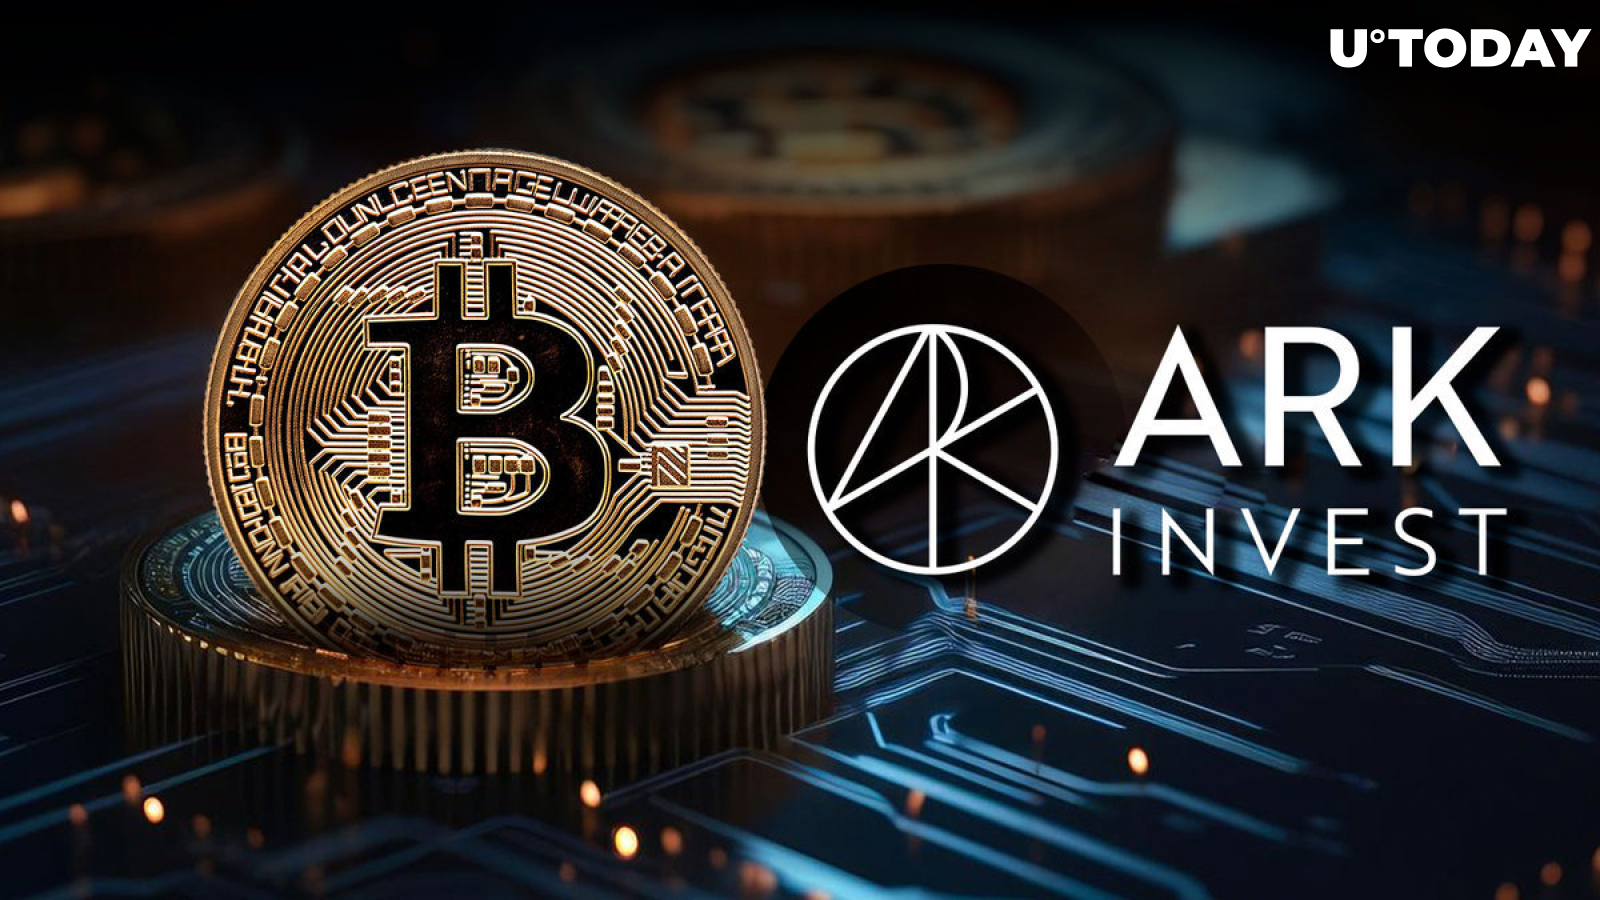 Bitcoin to $2.3 Million? ARK Invest Doesn't Exclude This